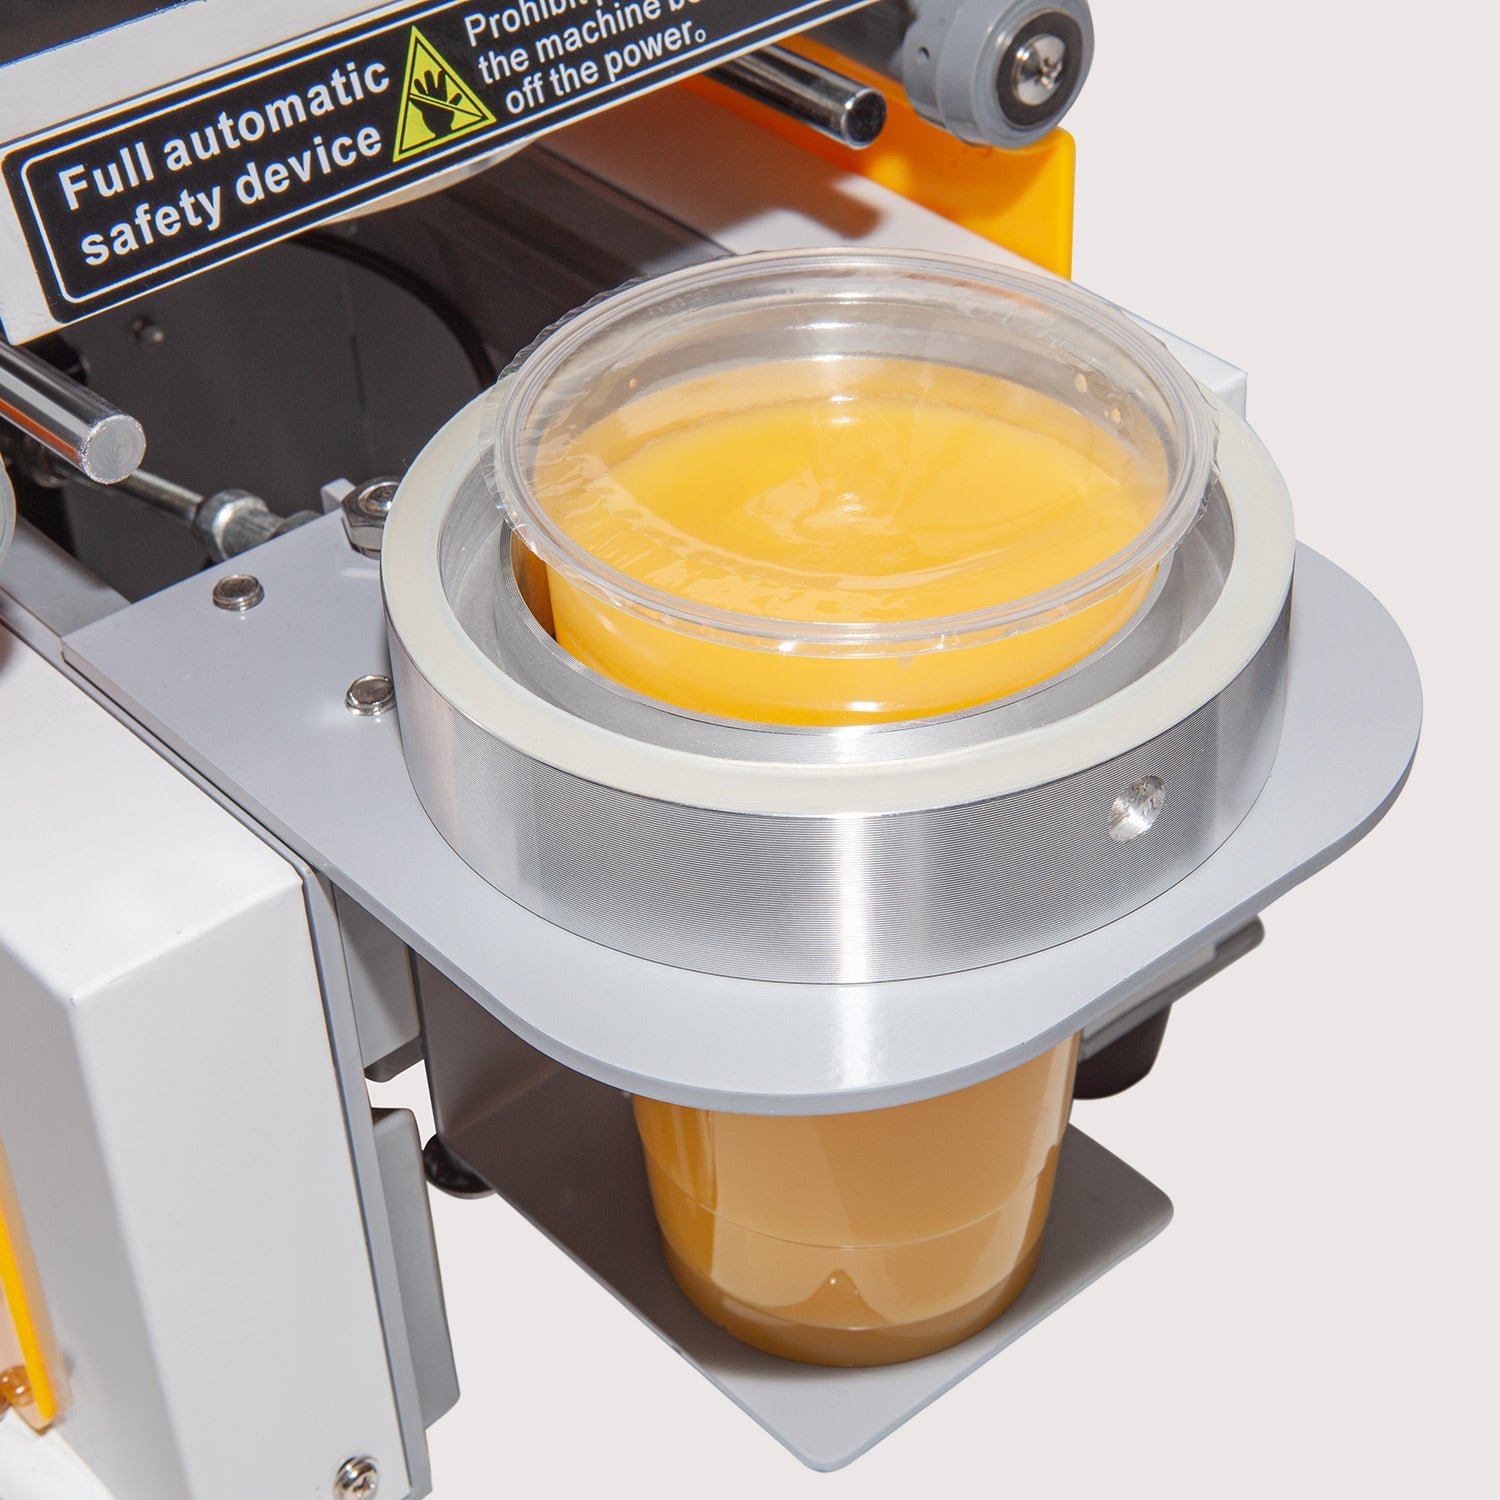 GorillaRock Boba Cup Sealing Machine | Commercial Use | Automatic Cup Sealer | 400-600 cups/h | Cups 3.5” & 3.7” (90 & 95 mm) diameter / 7” (180 mm) max height